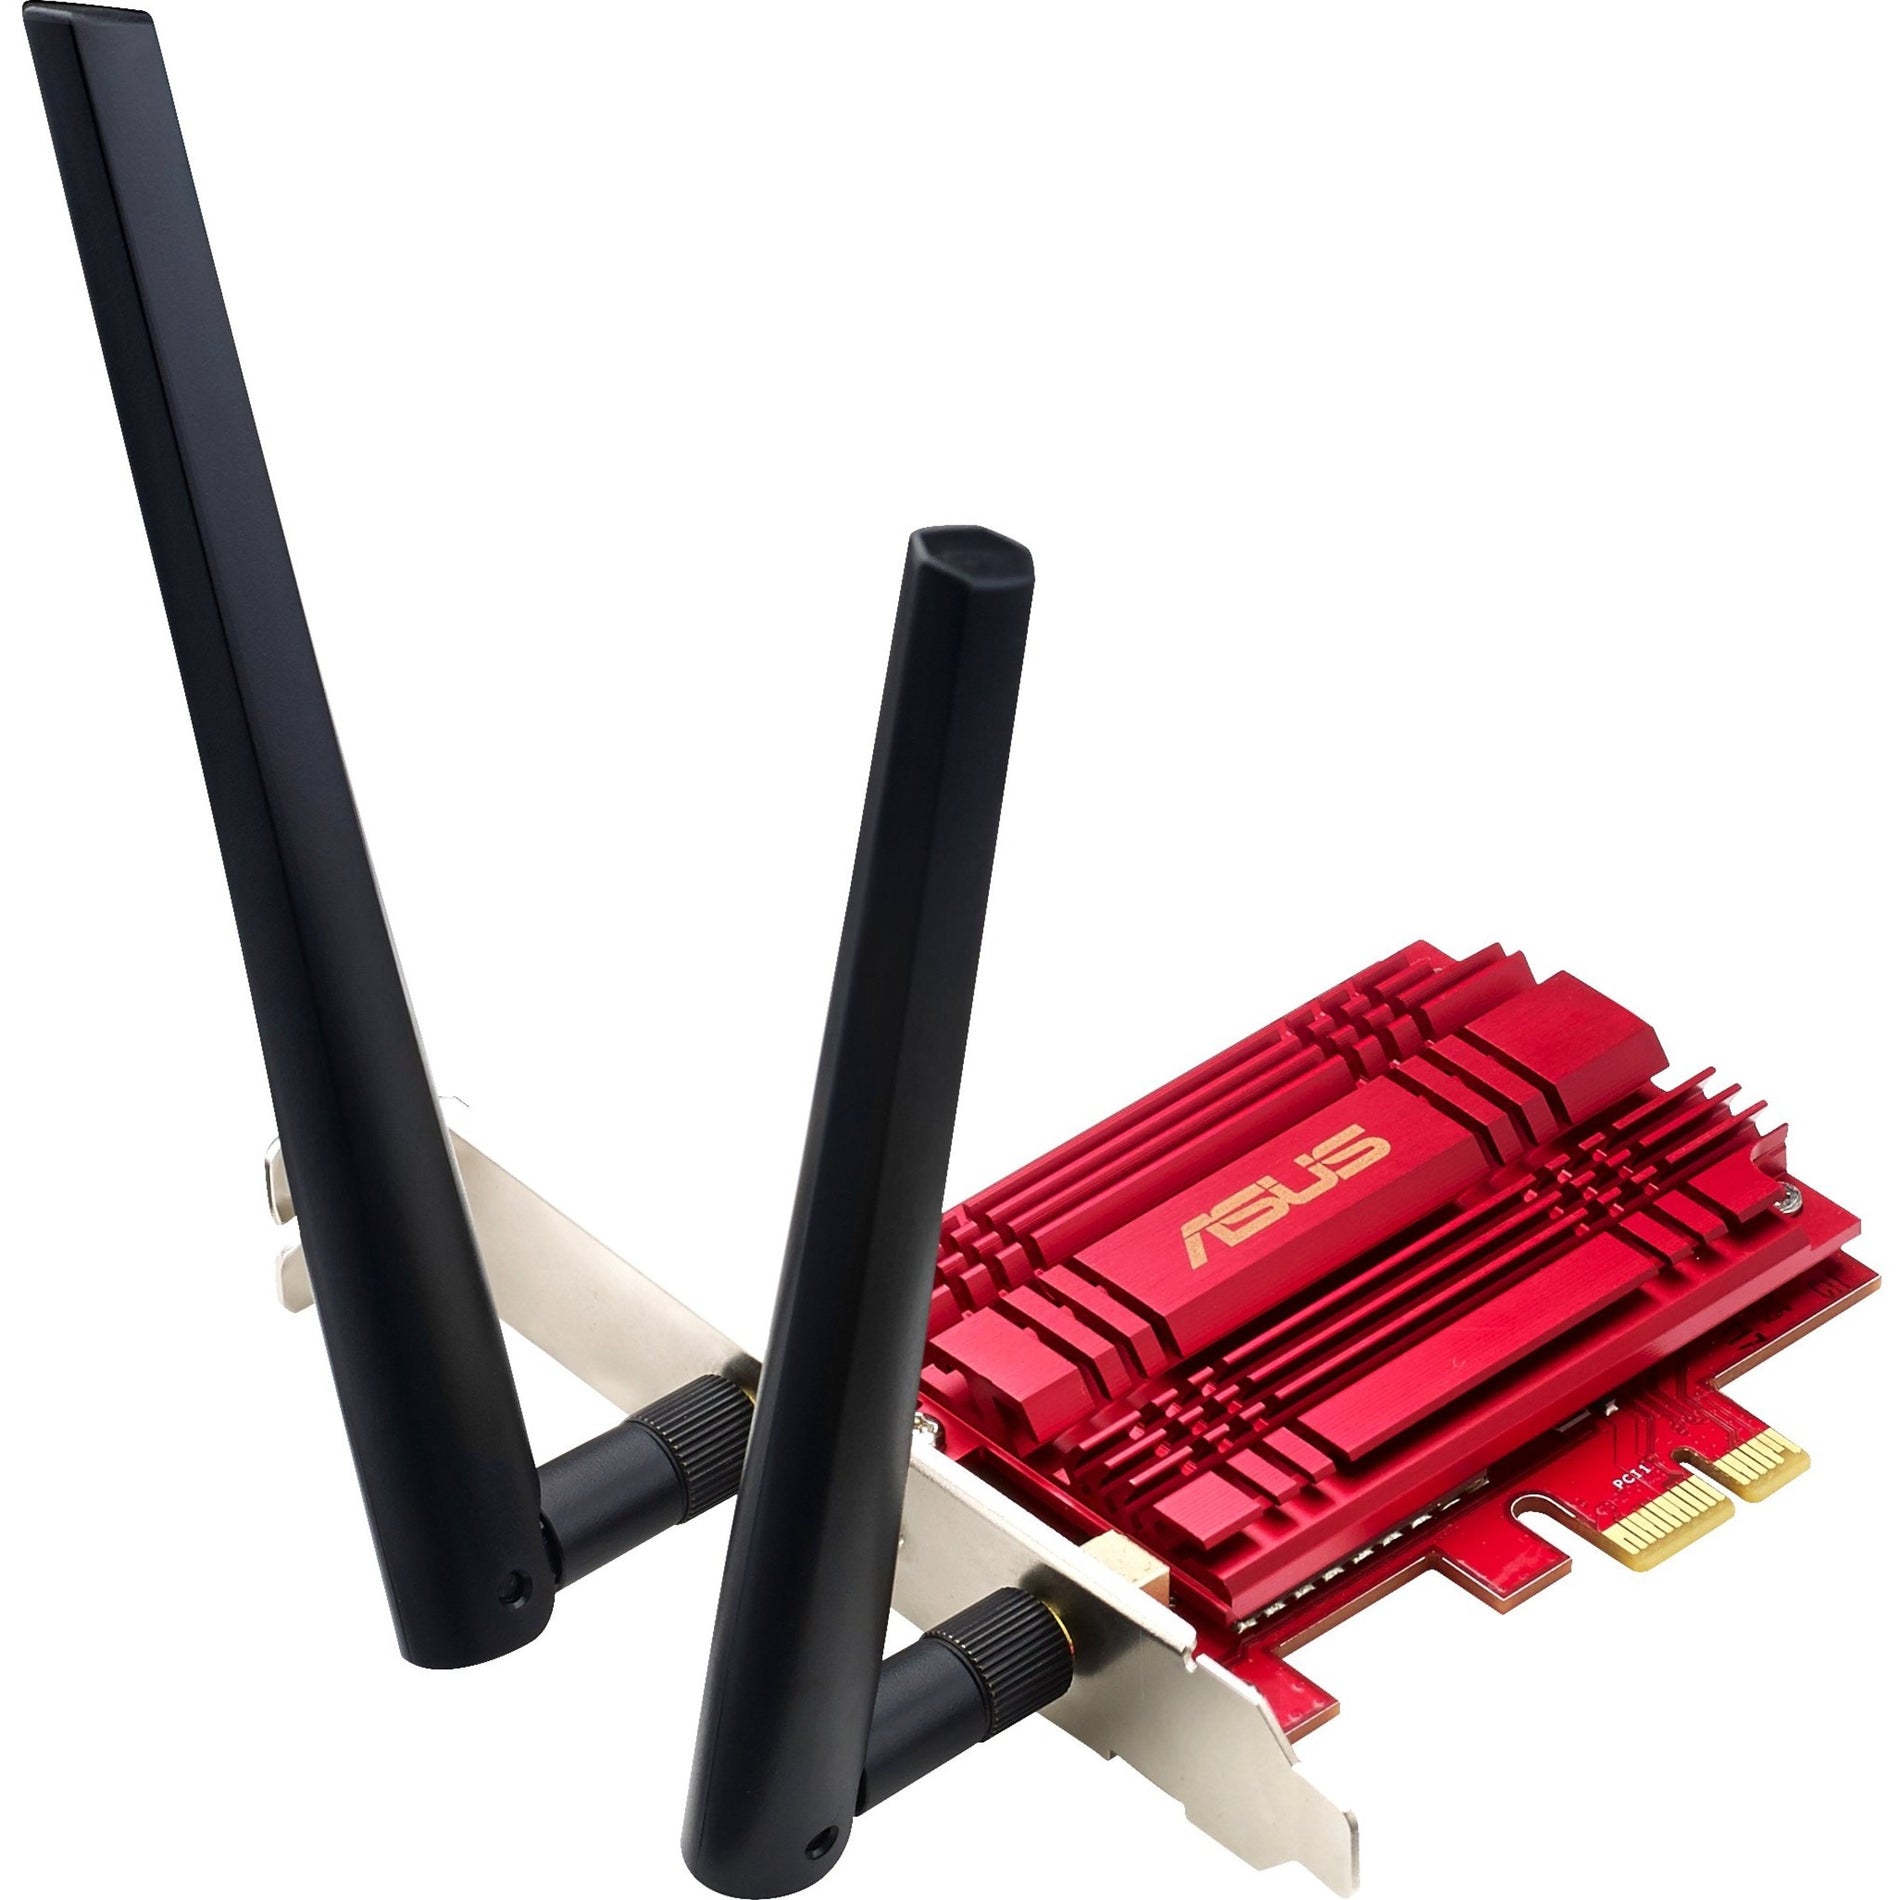 Asus PCE-AC56 Dual-band Wireless-AC1300 PCI-E Adapter, High-Speed Wi-Fi for Desktop Computer